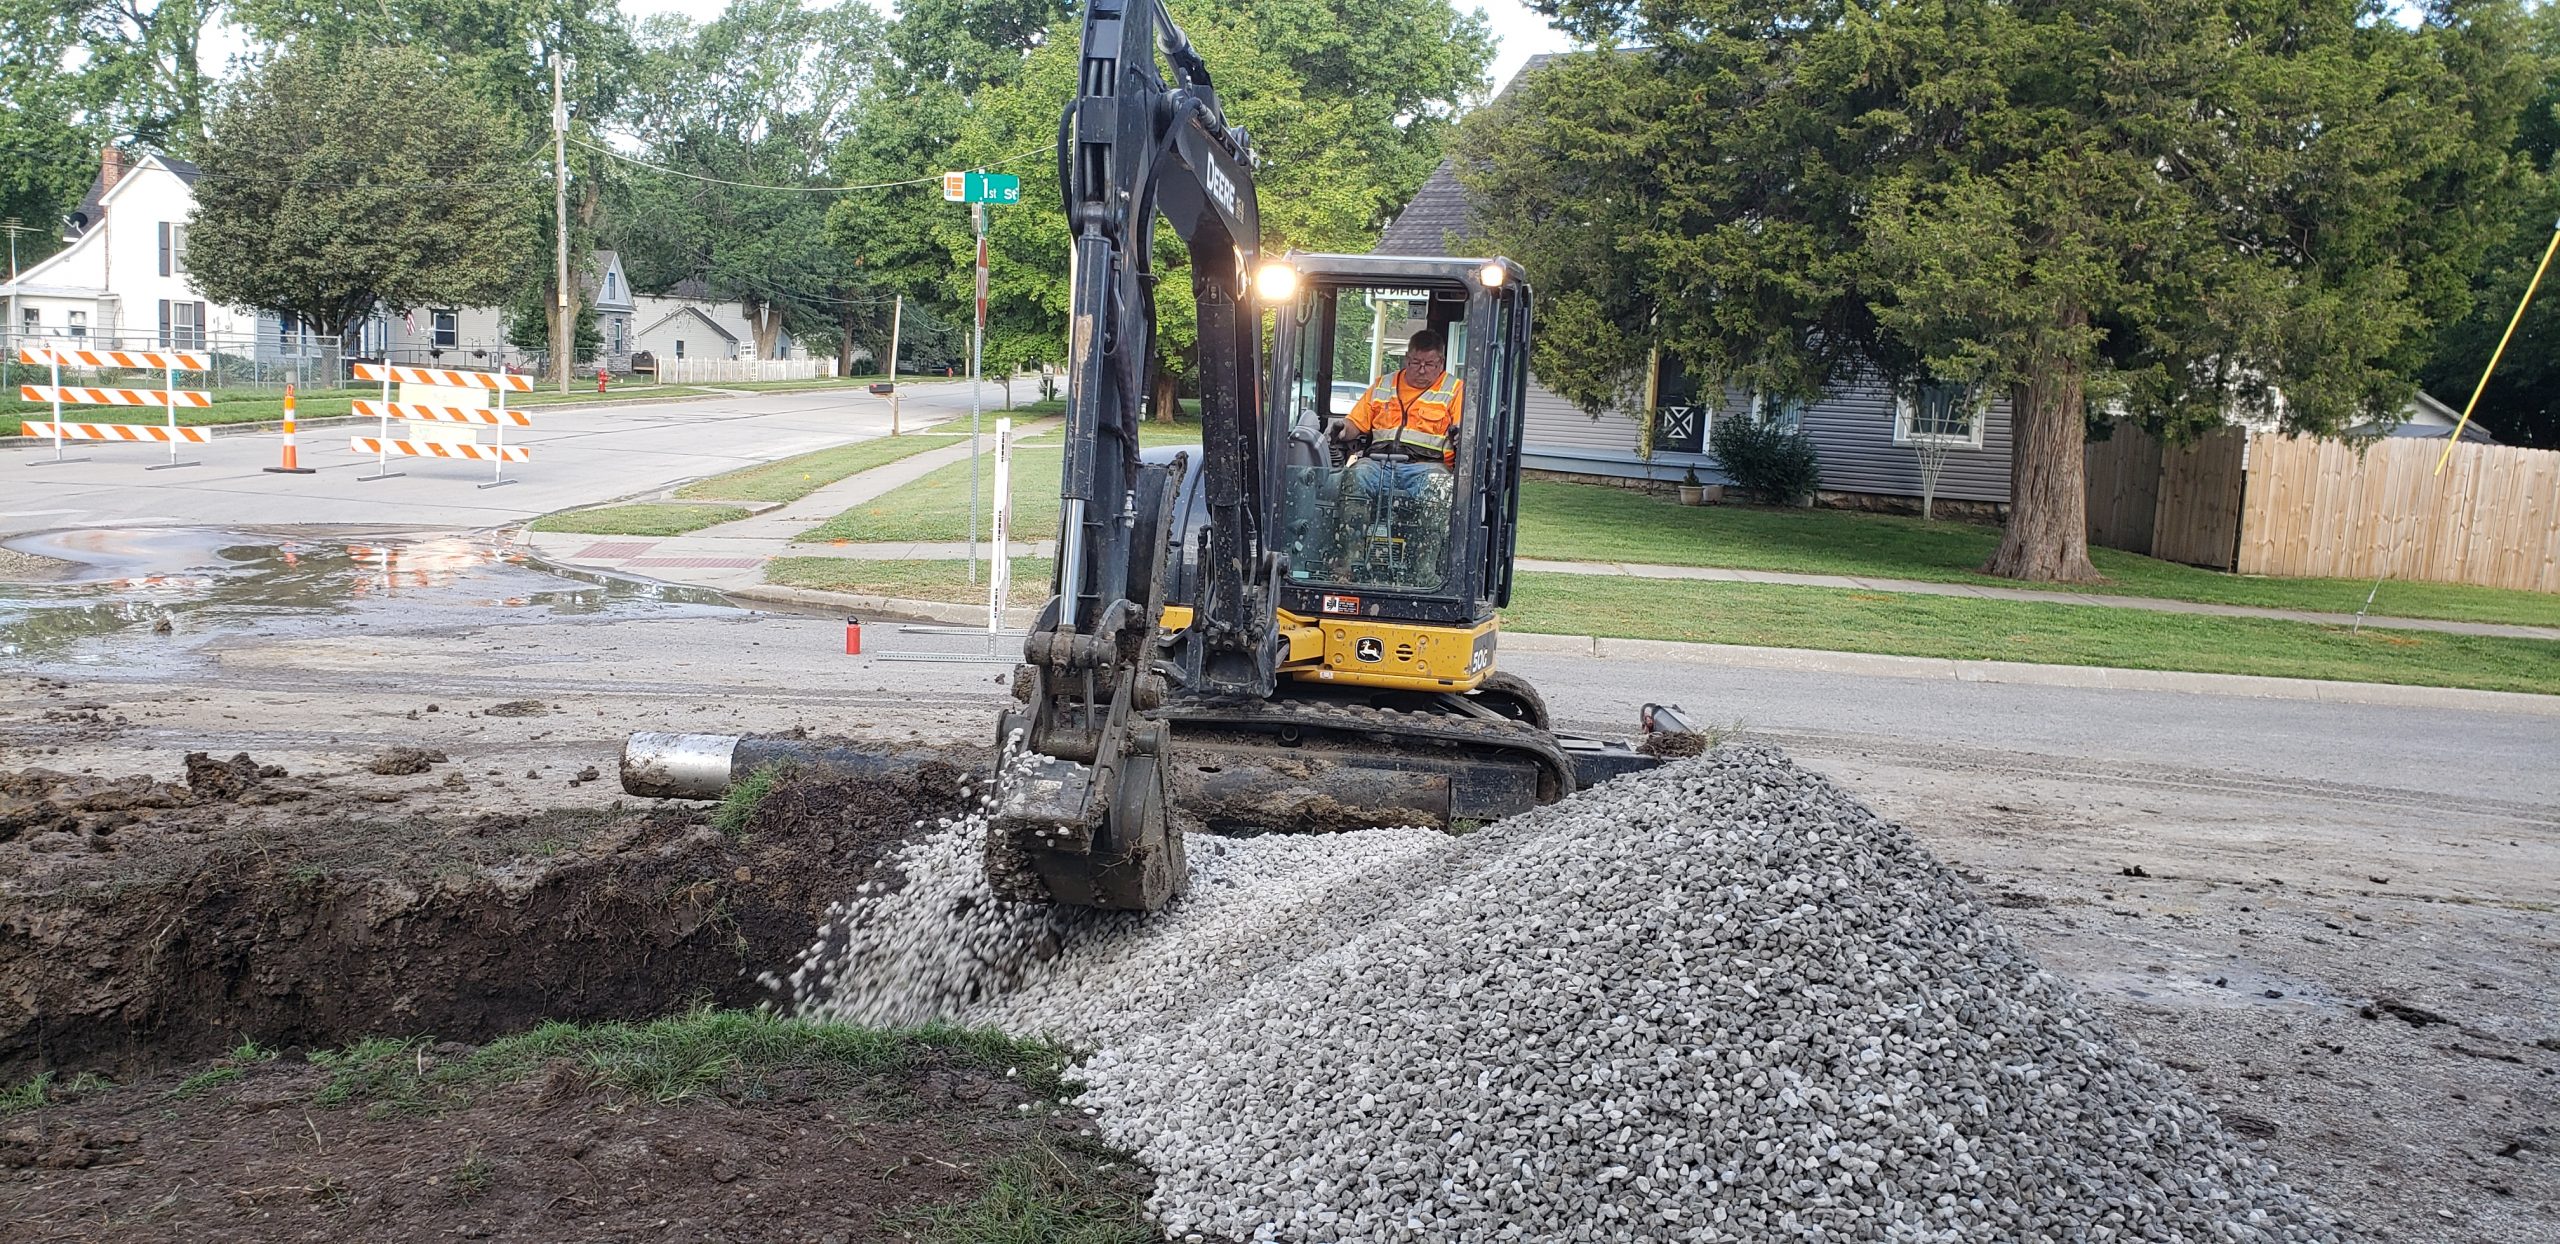 A utility worker uses a backhoe to repair a broken water line